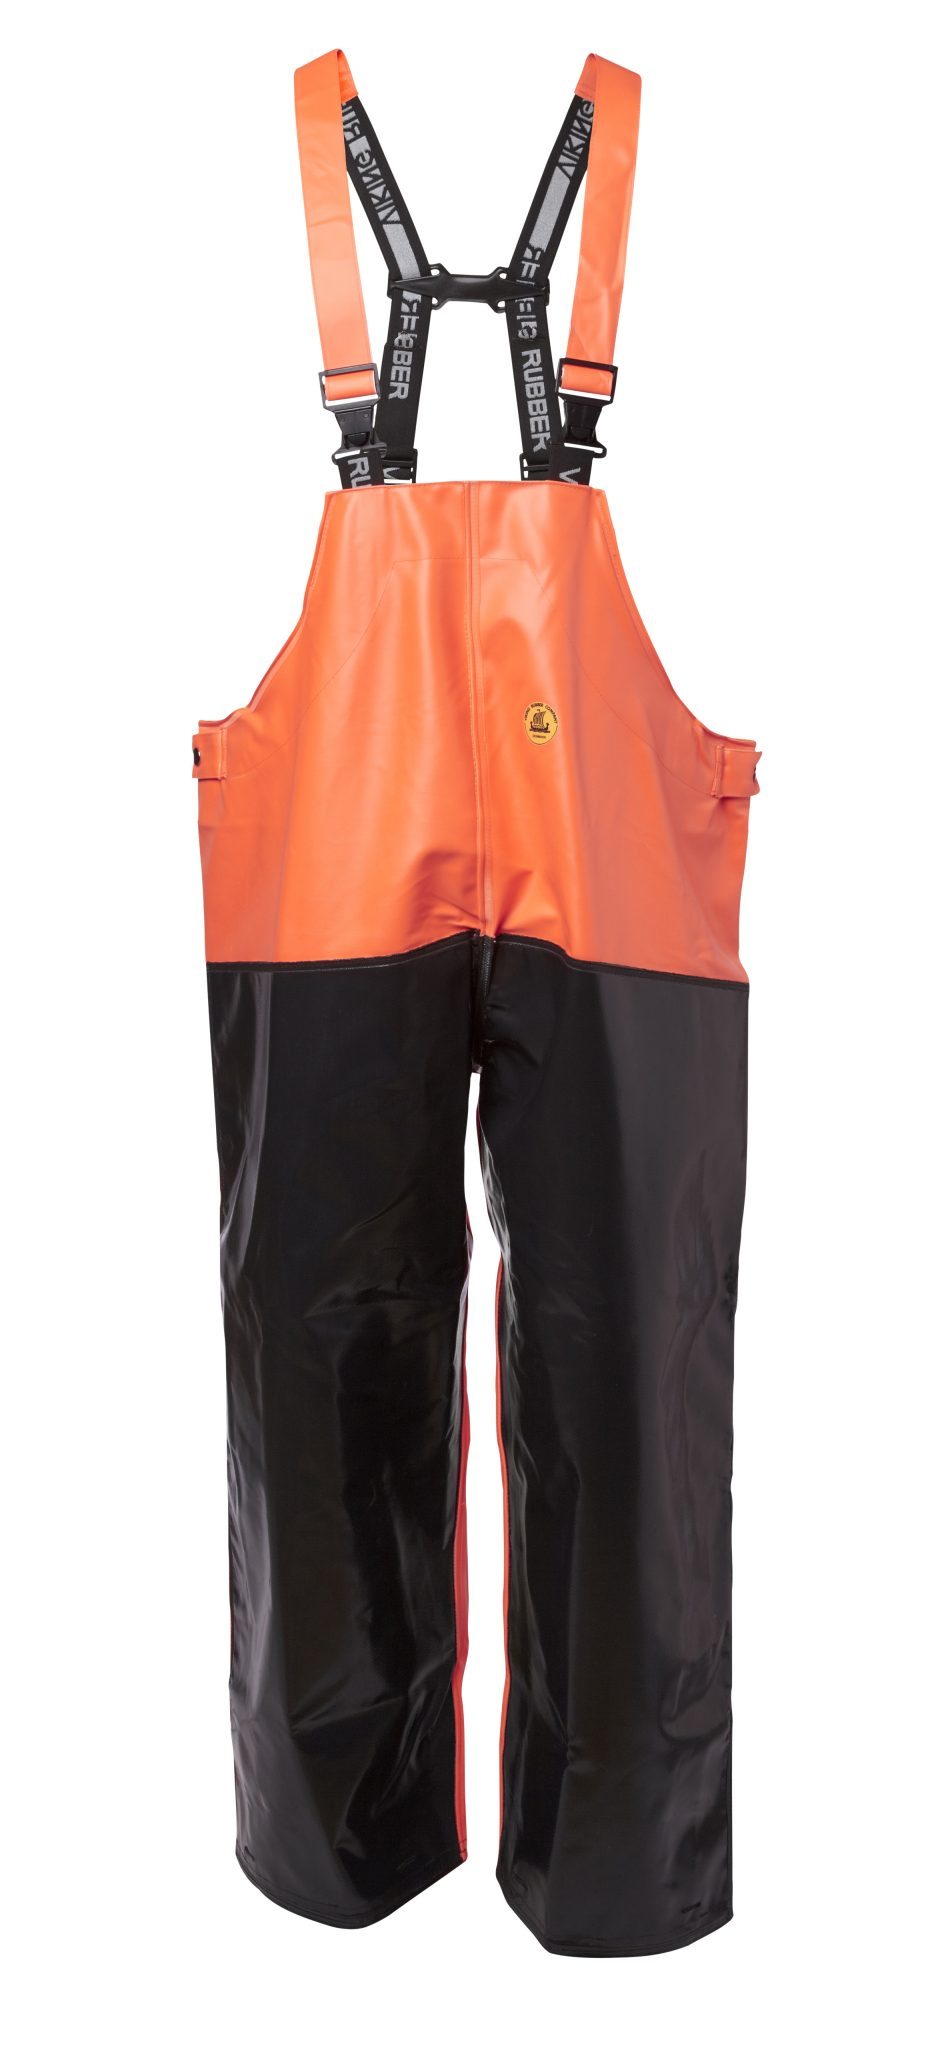 Bib Trousers with reinforcement - Viking Rubber Co.